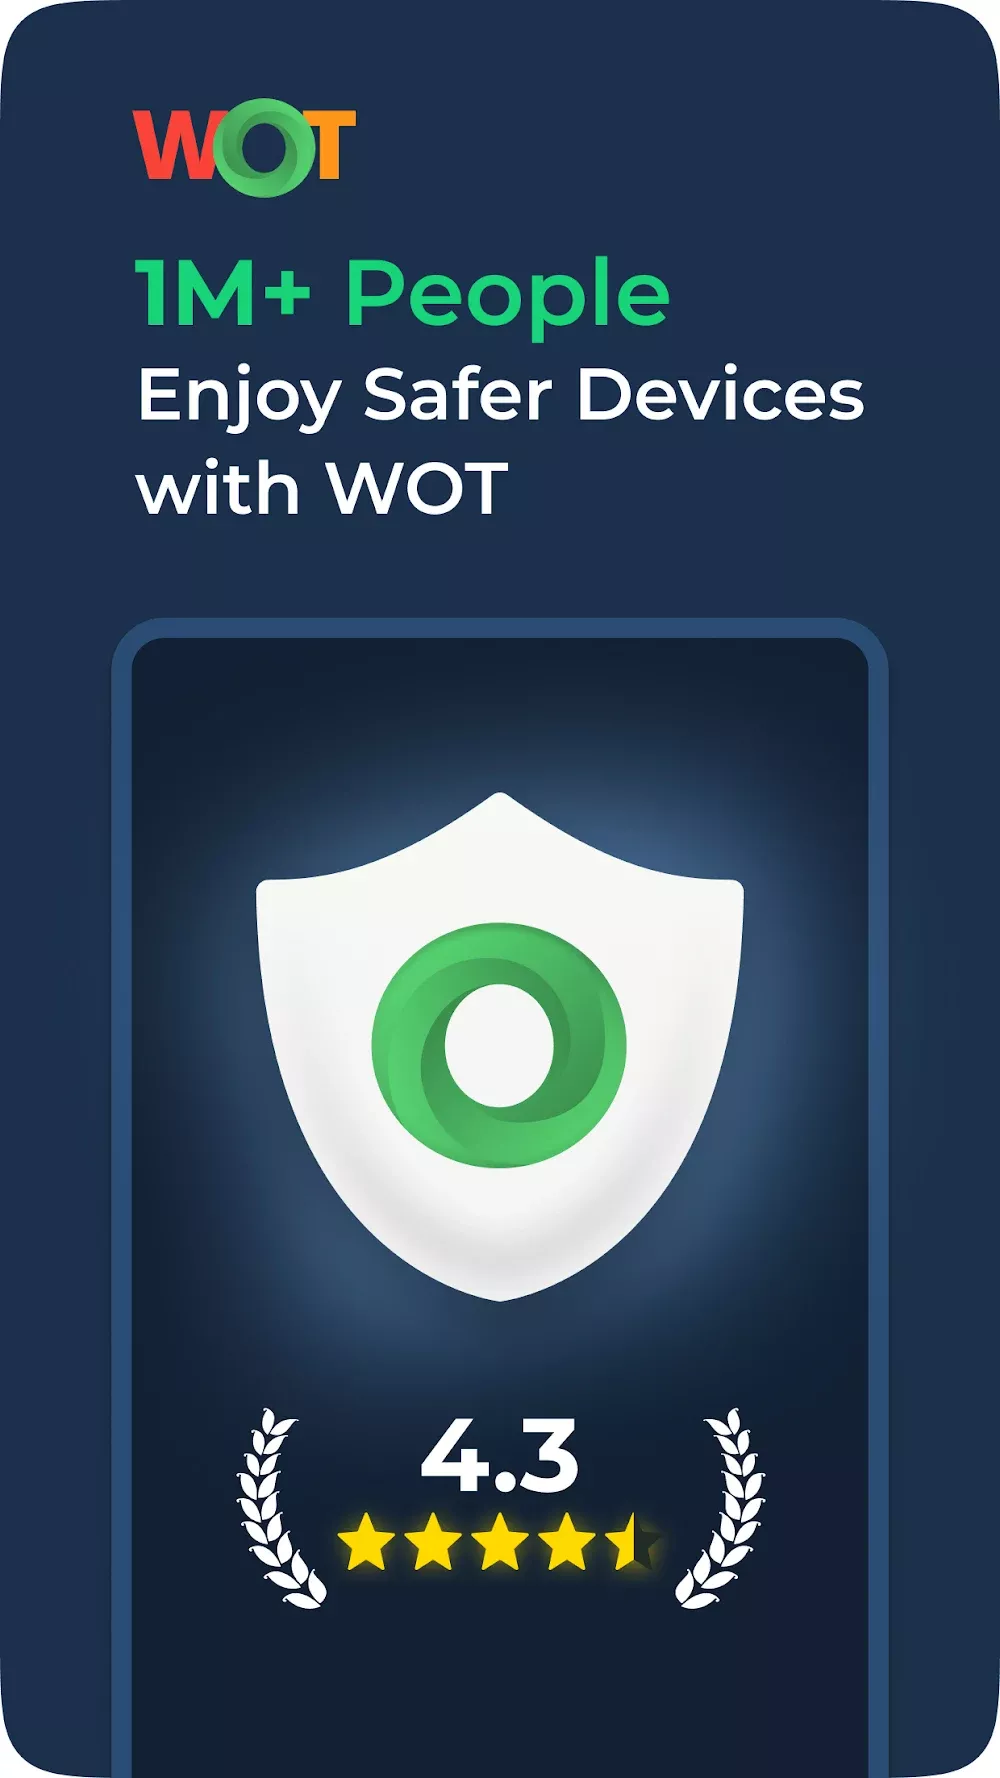 WOT Mobile Security Protection